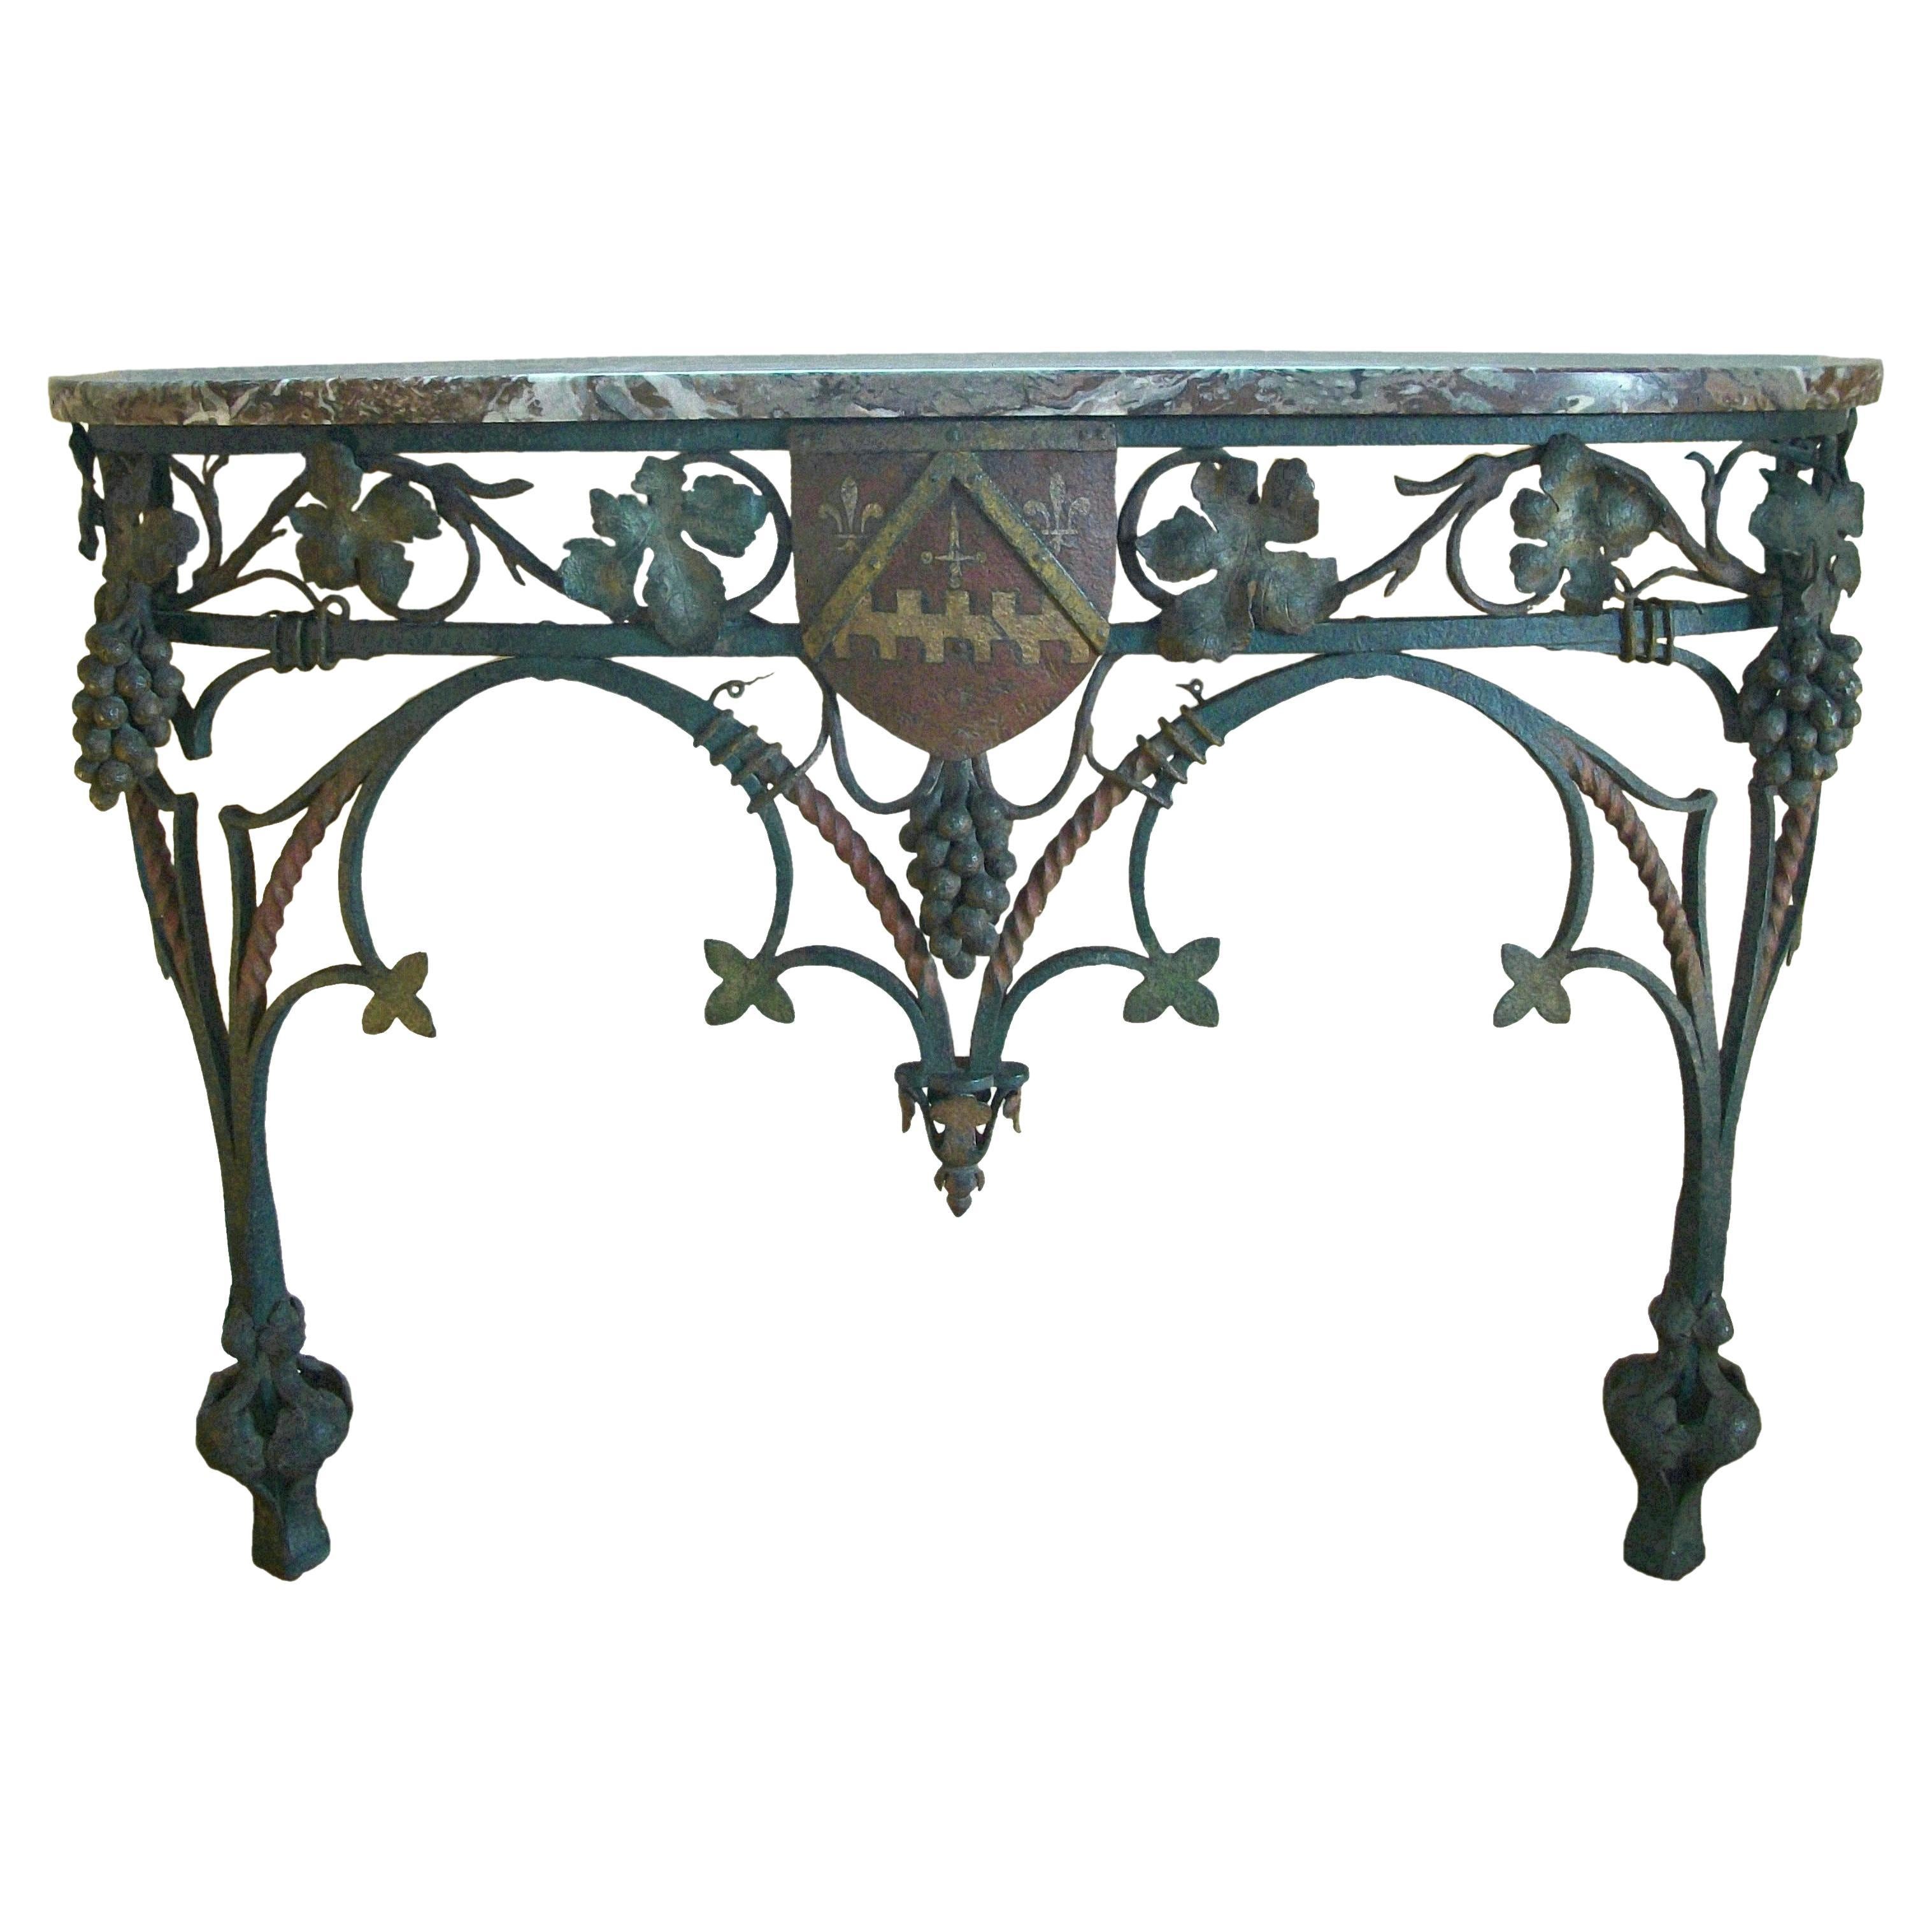 Neo Gothic Wrought Iron & Marble Console Table with Crest, France, circa 1850 For Sale